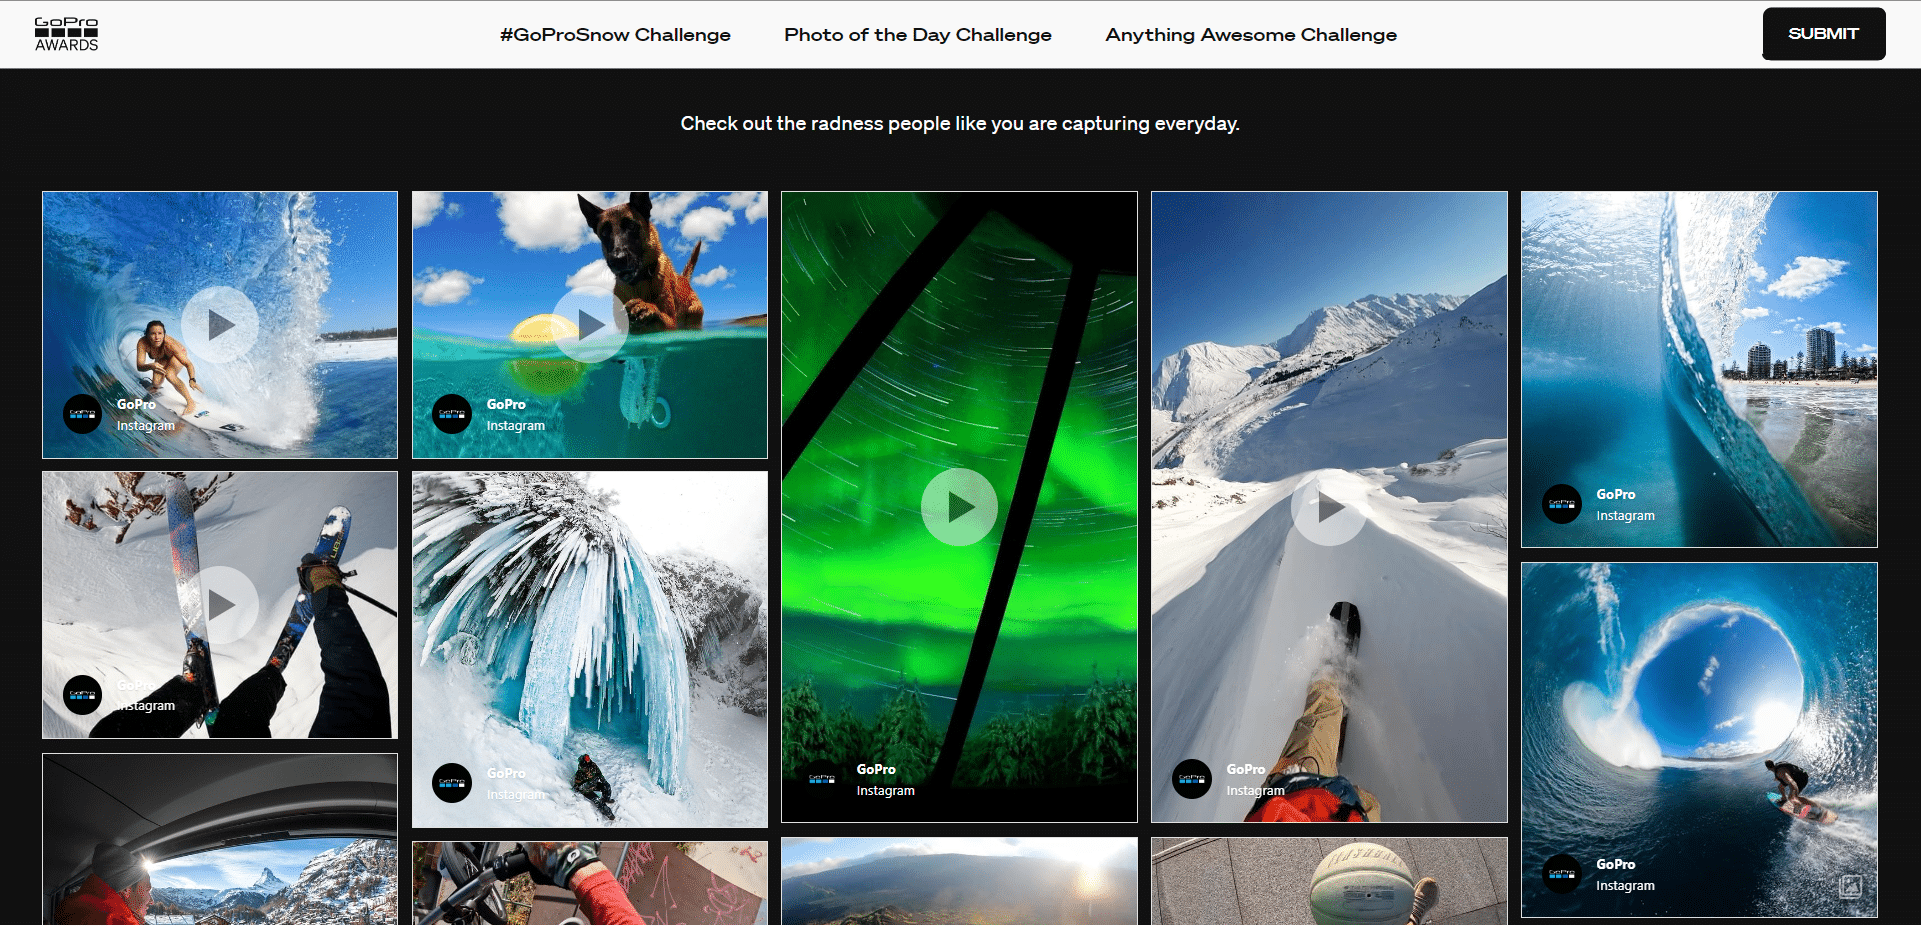 gopro awards - consumer-generated content